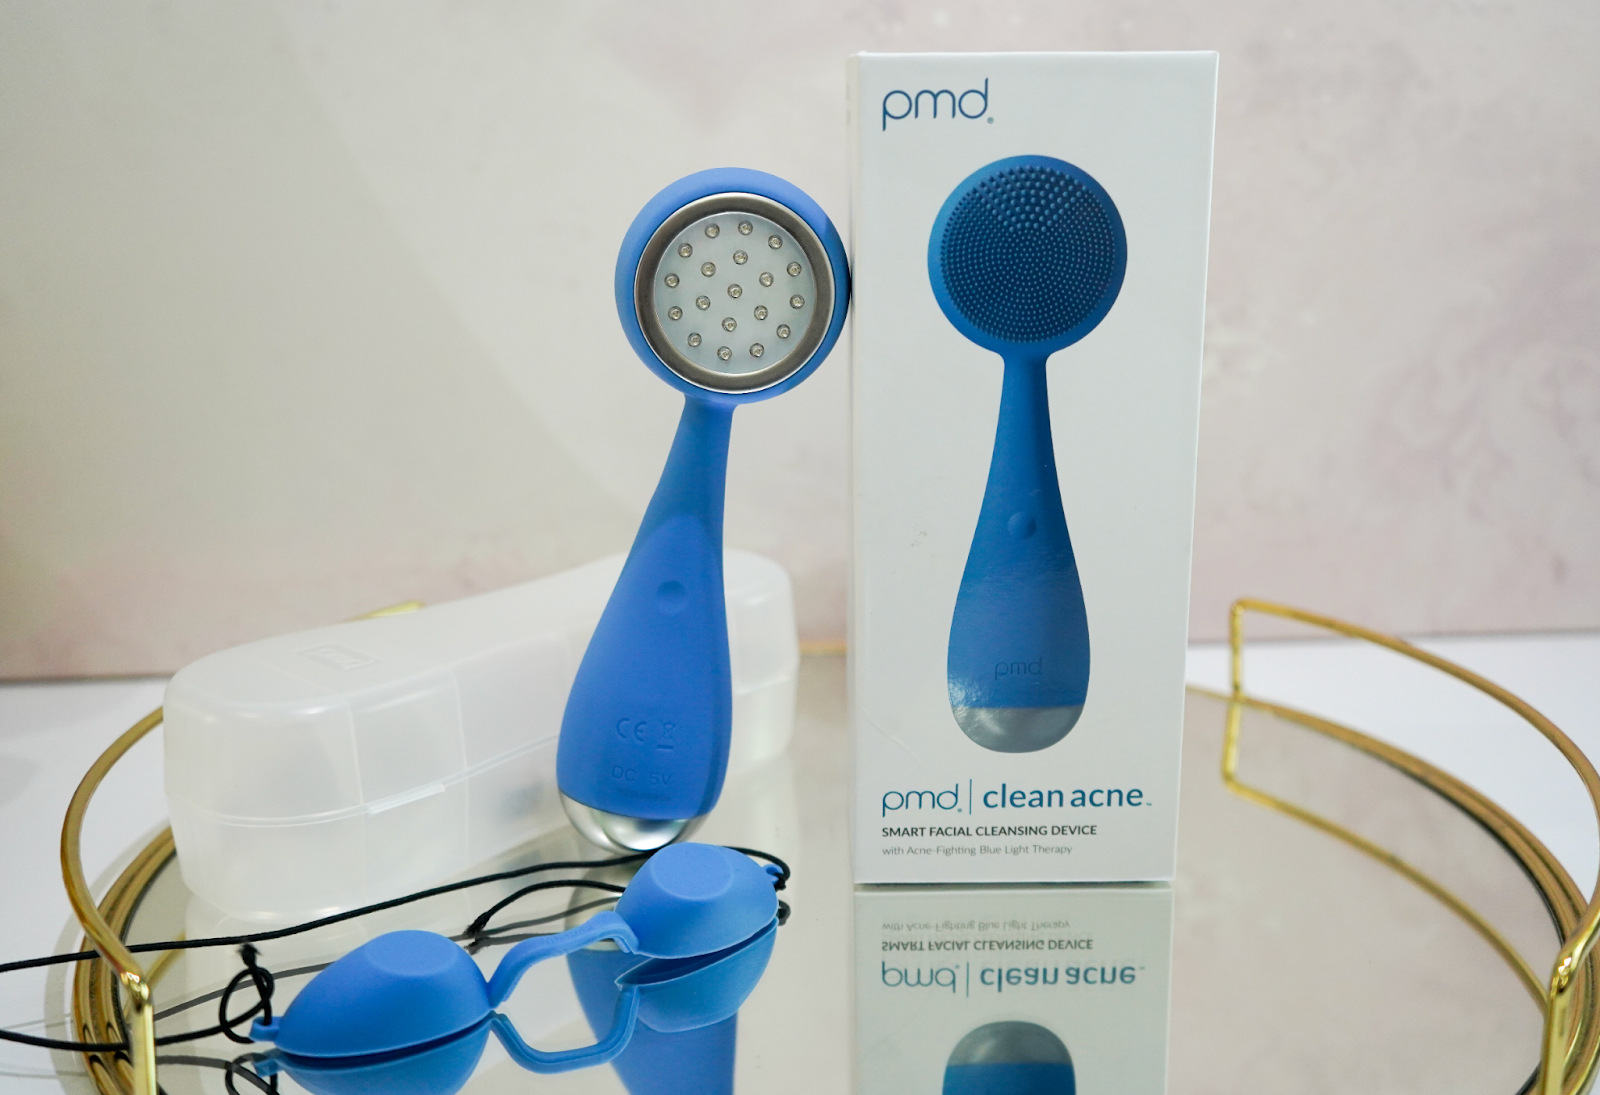 pmd clean acne 